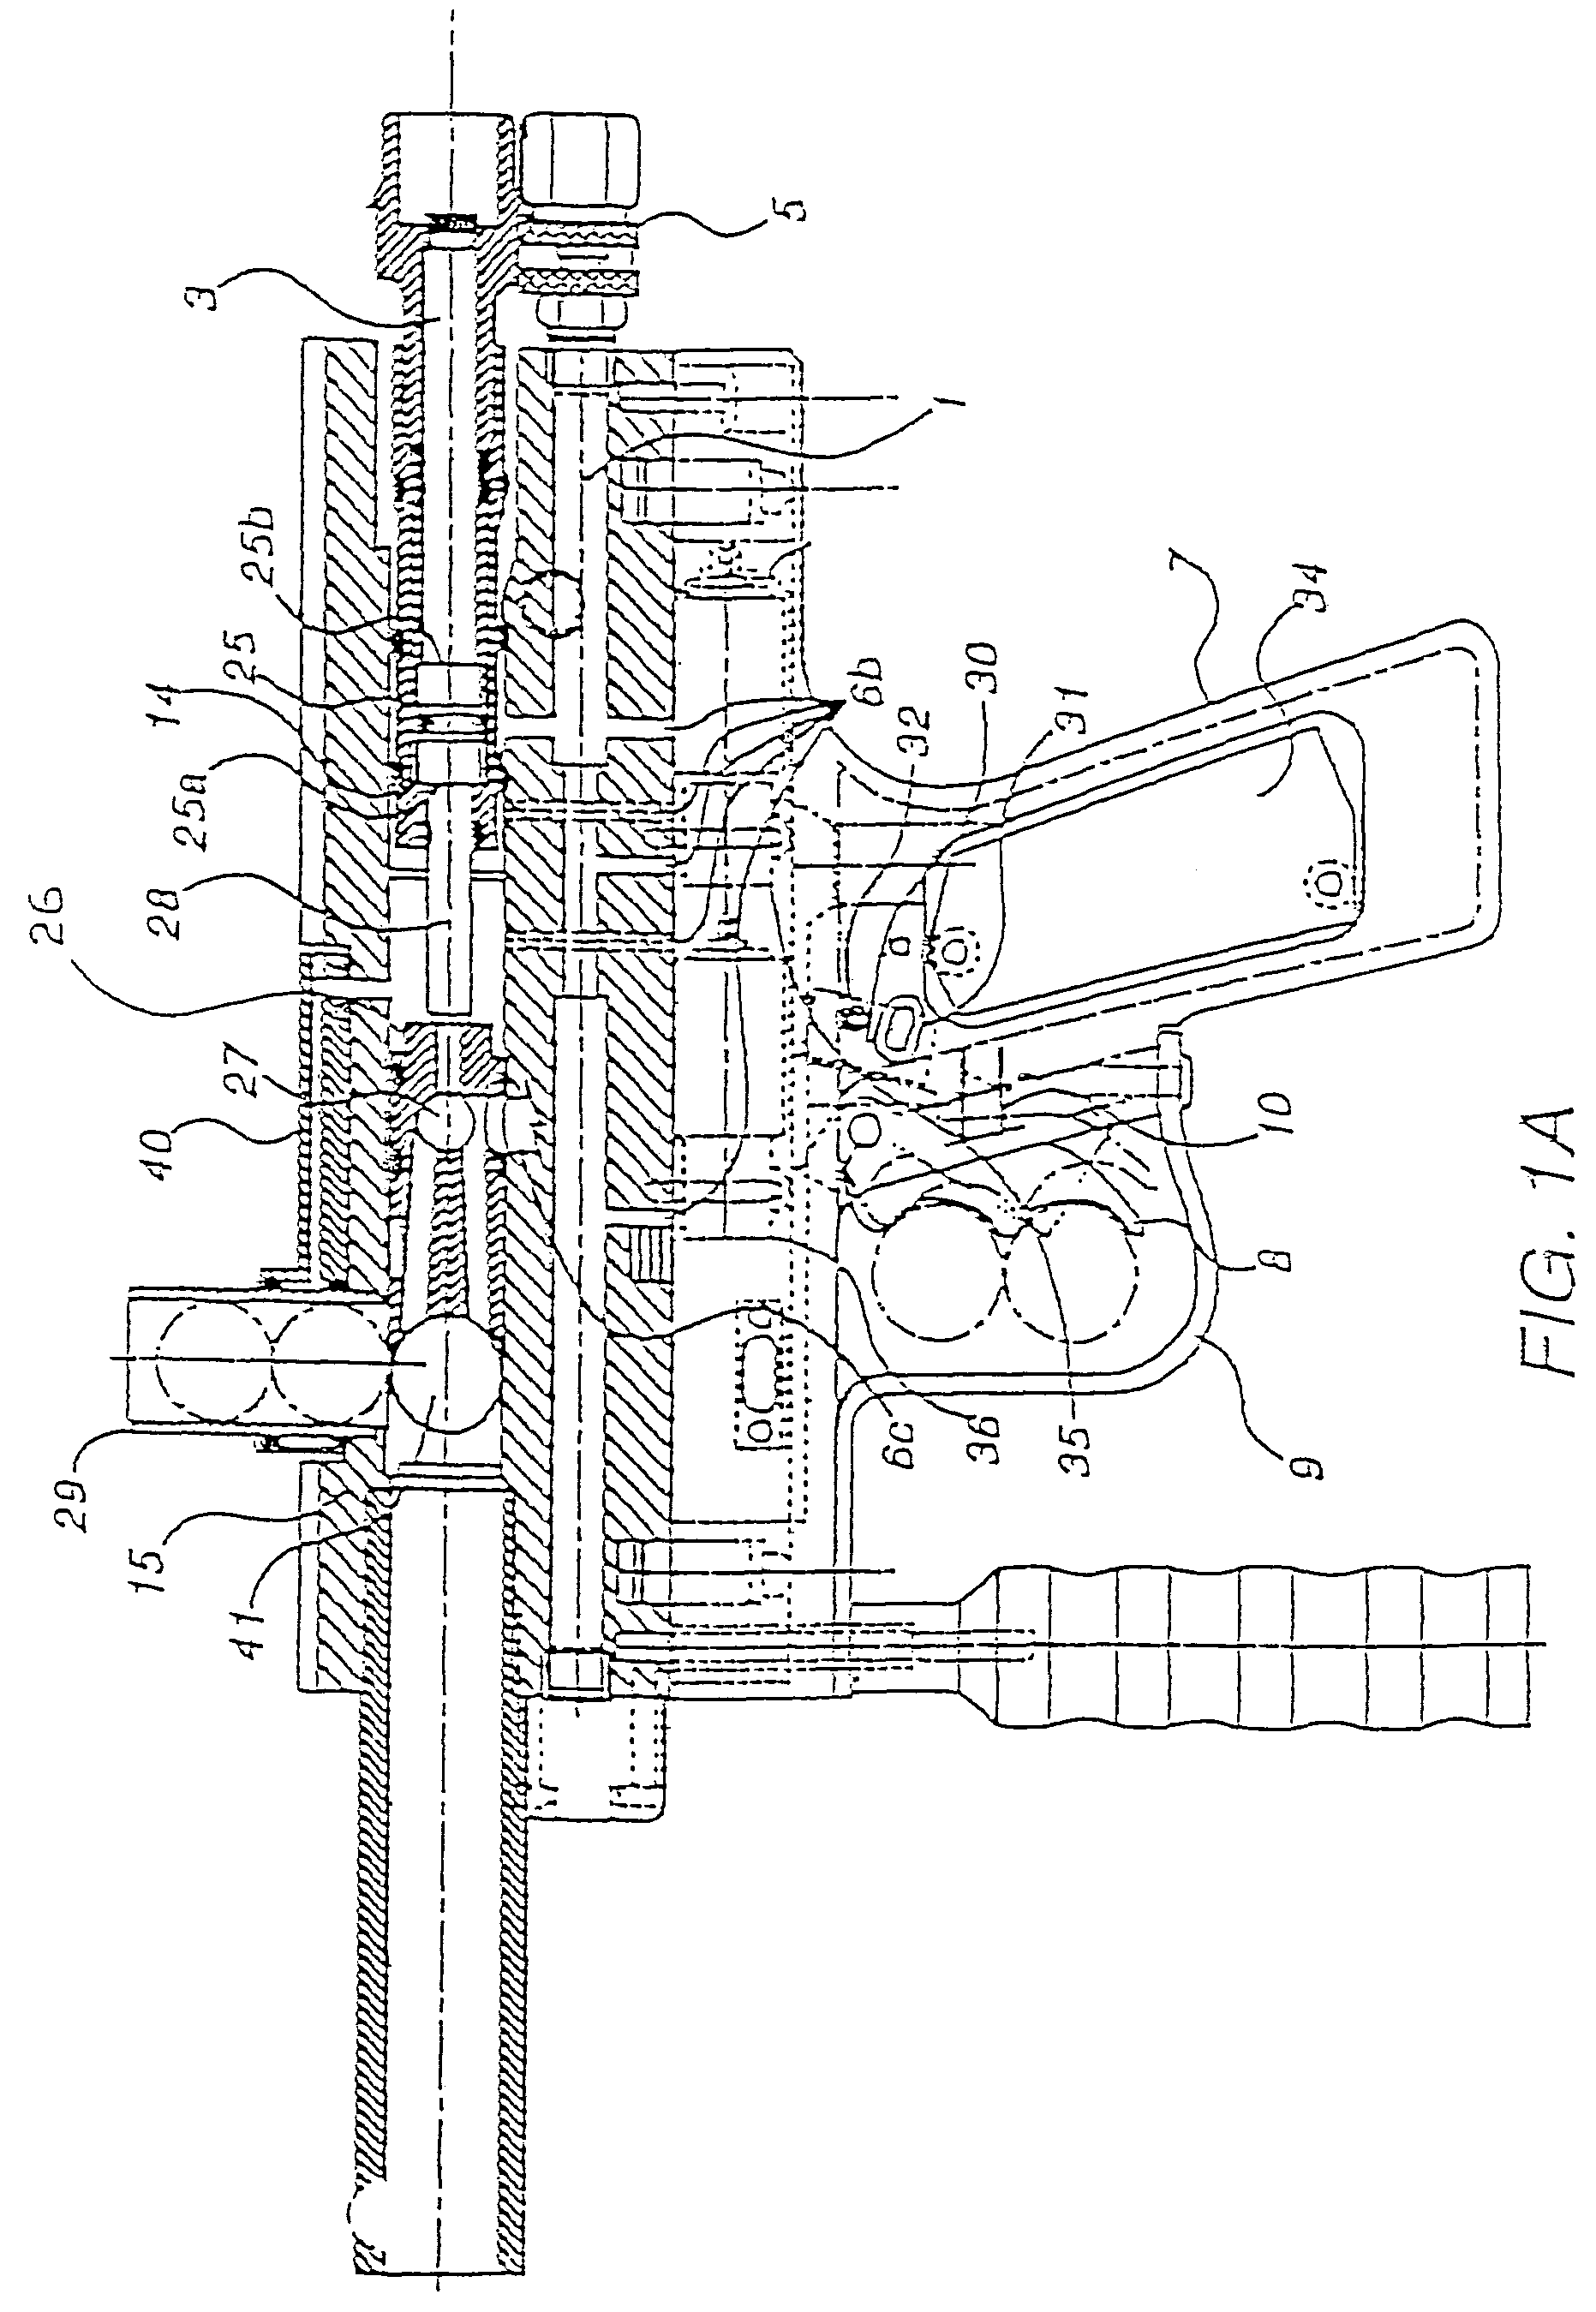 Pneumatically operated projectile launching device